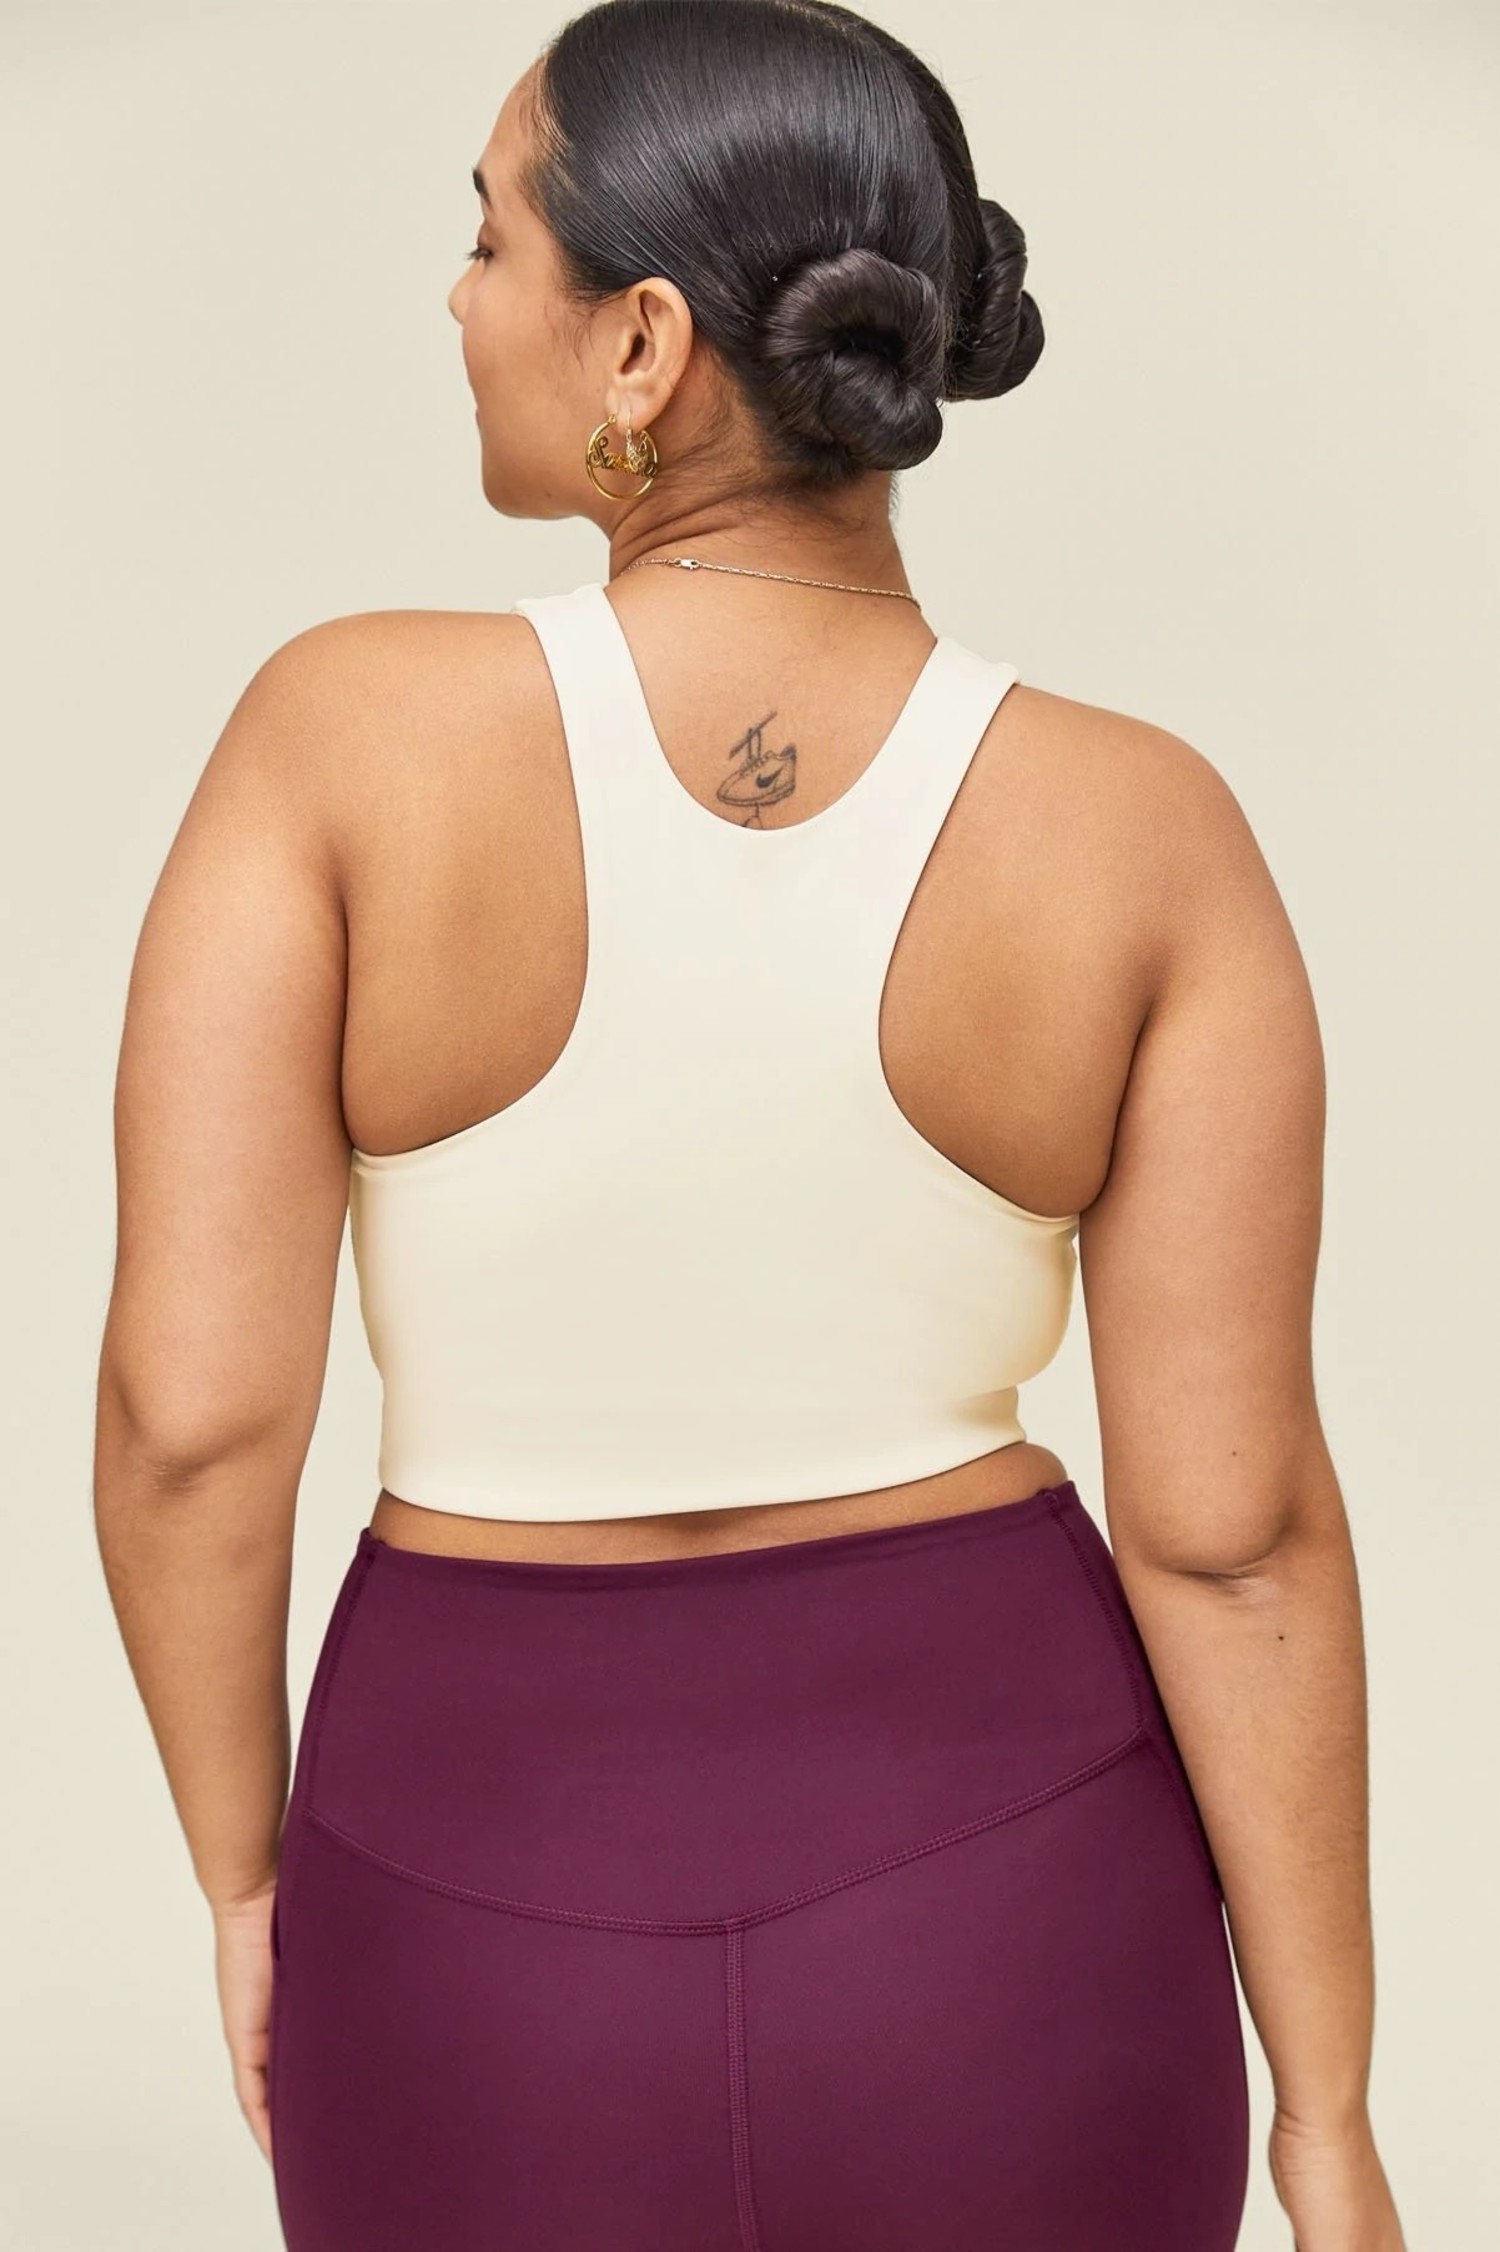 Blue Dylan Sport Bra by Girlfriend Collective on Sale